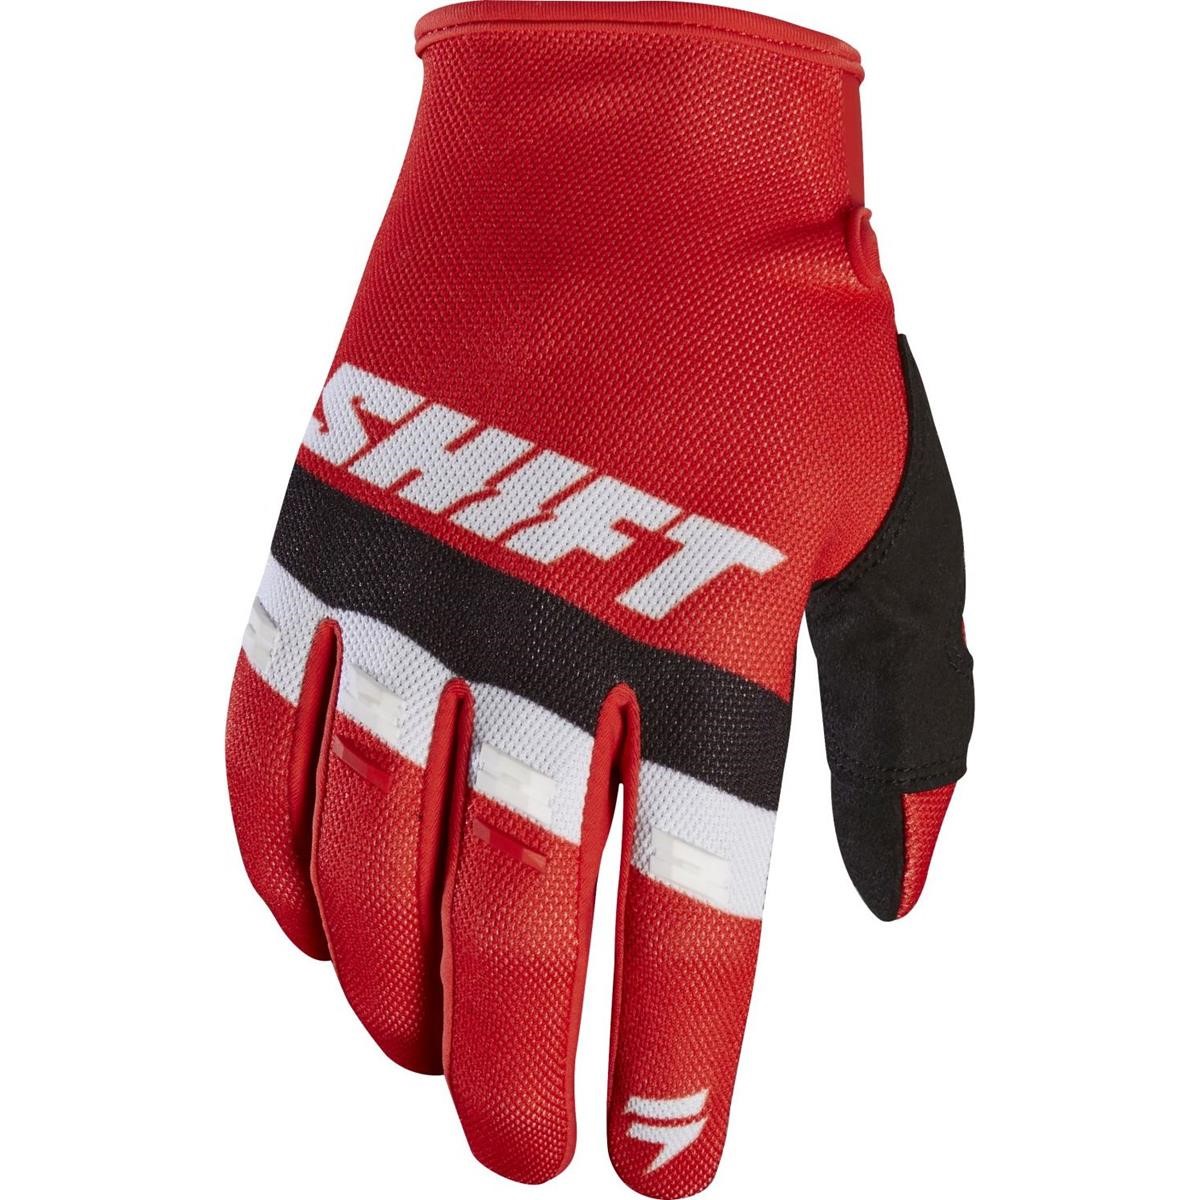 Shift Gloves Whit3 Air Red -Tarmac